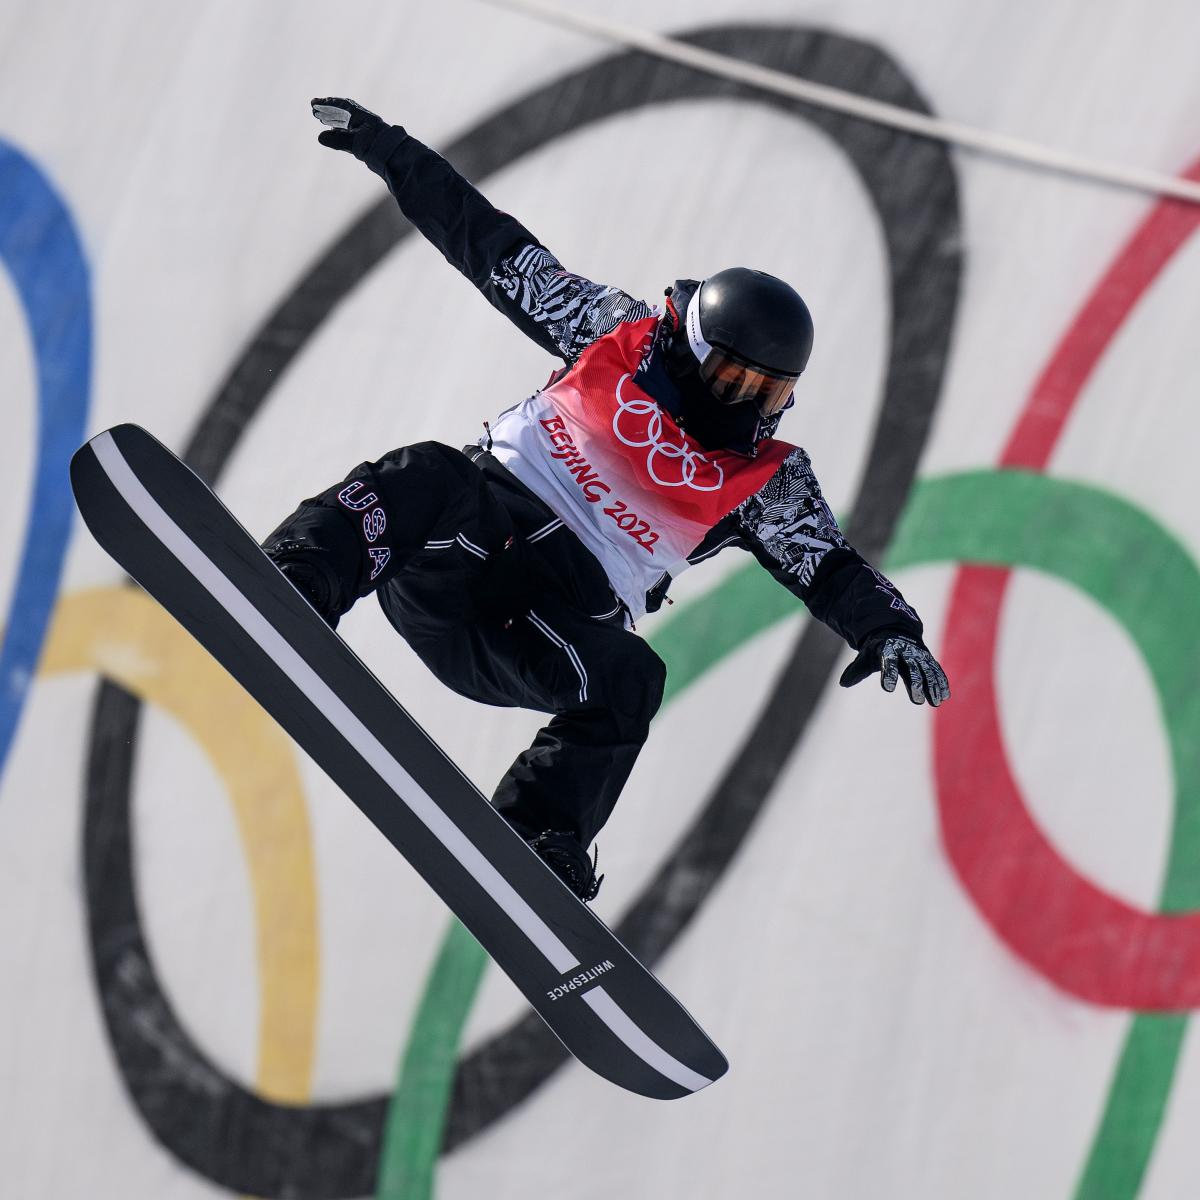 Olympic Snowboarding Halfpipe 2022 Live-Stream Schedule for Men's Final | News, Scores